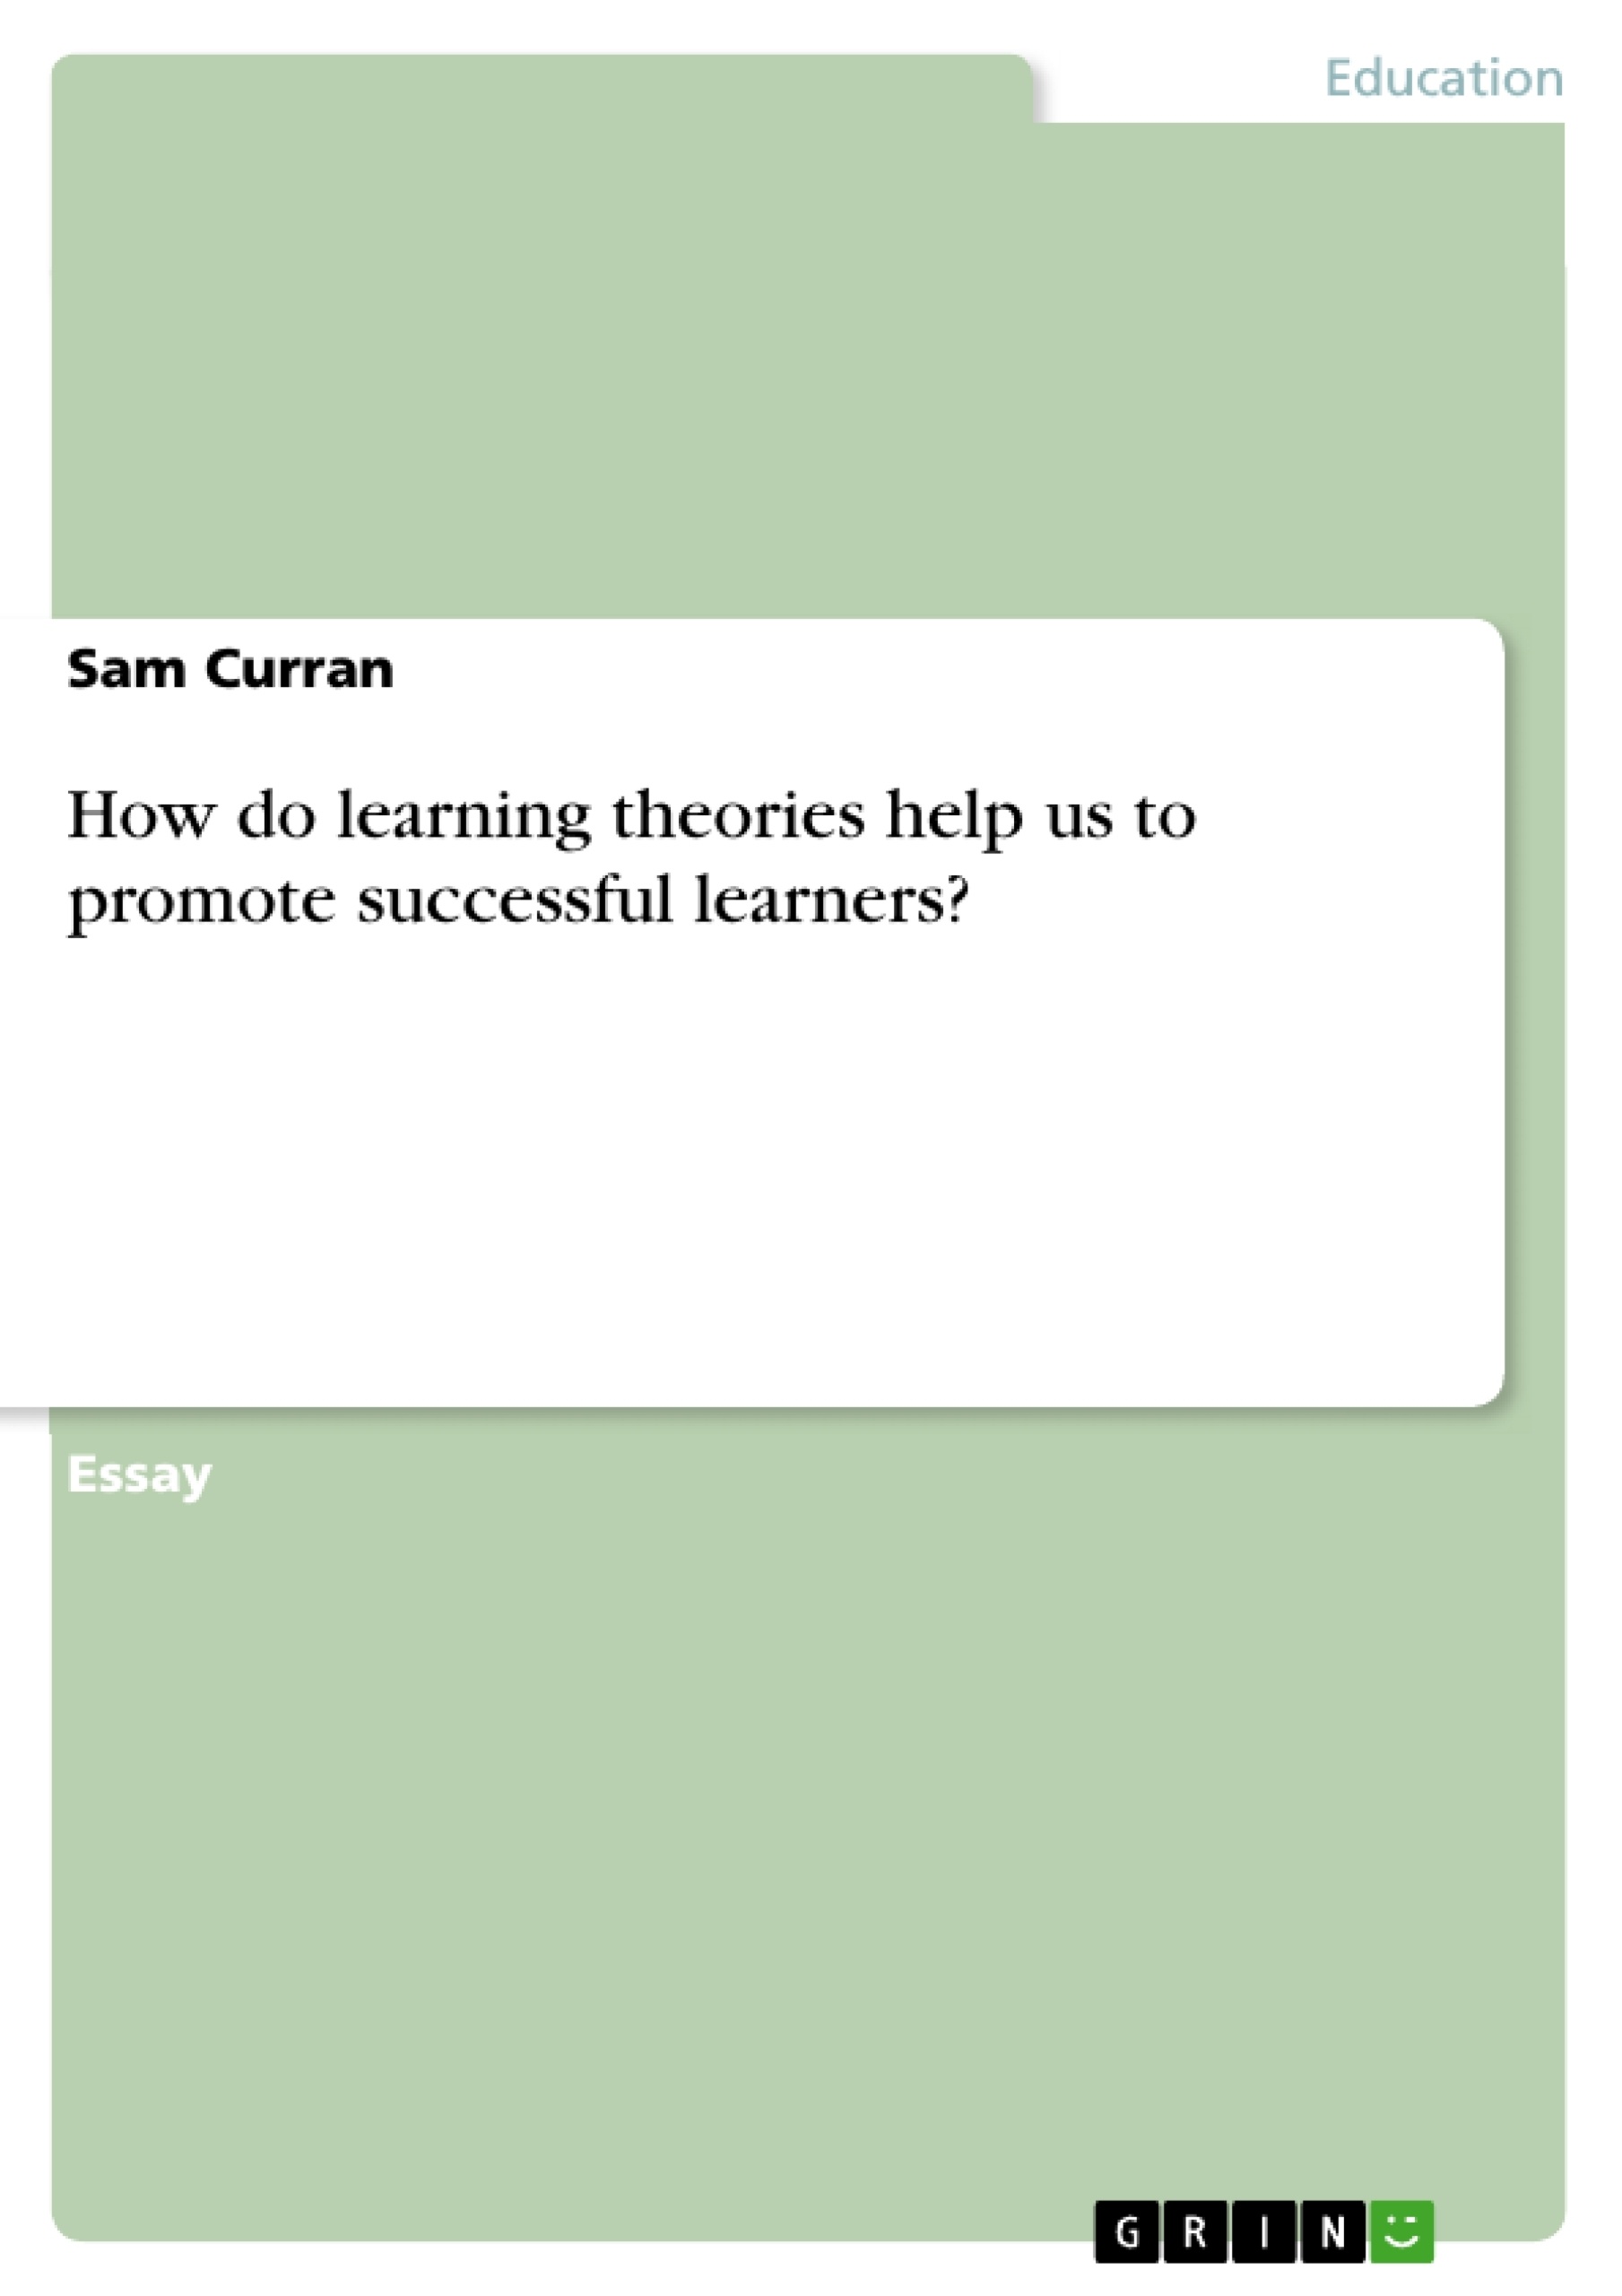 Title: How do learning theories help us to promote successful learners?